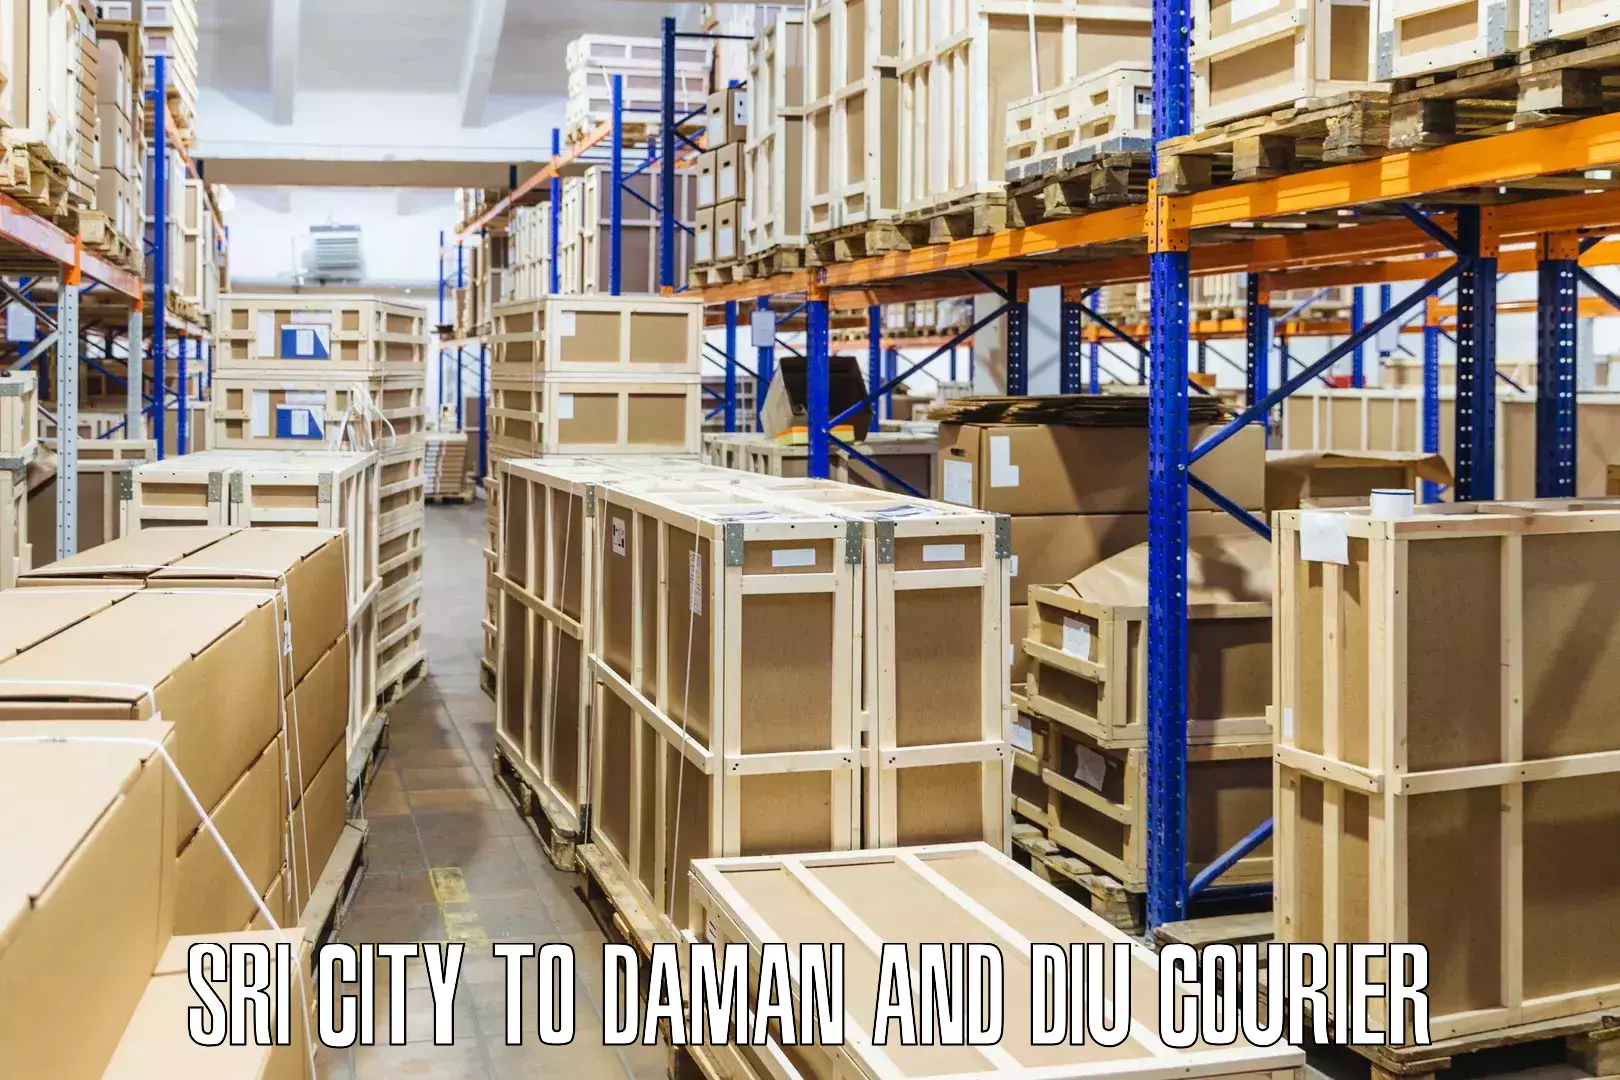 Courier service booking Sri City to Daman and Diu